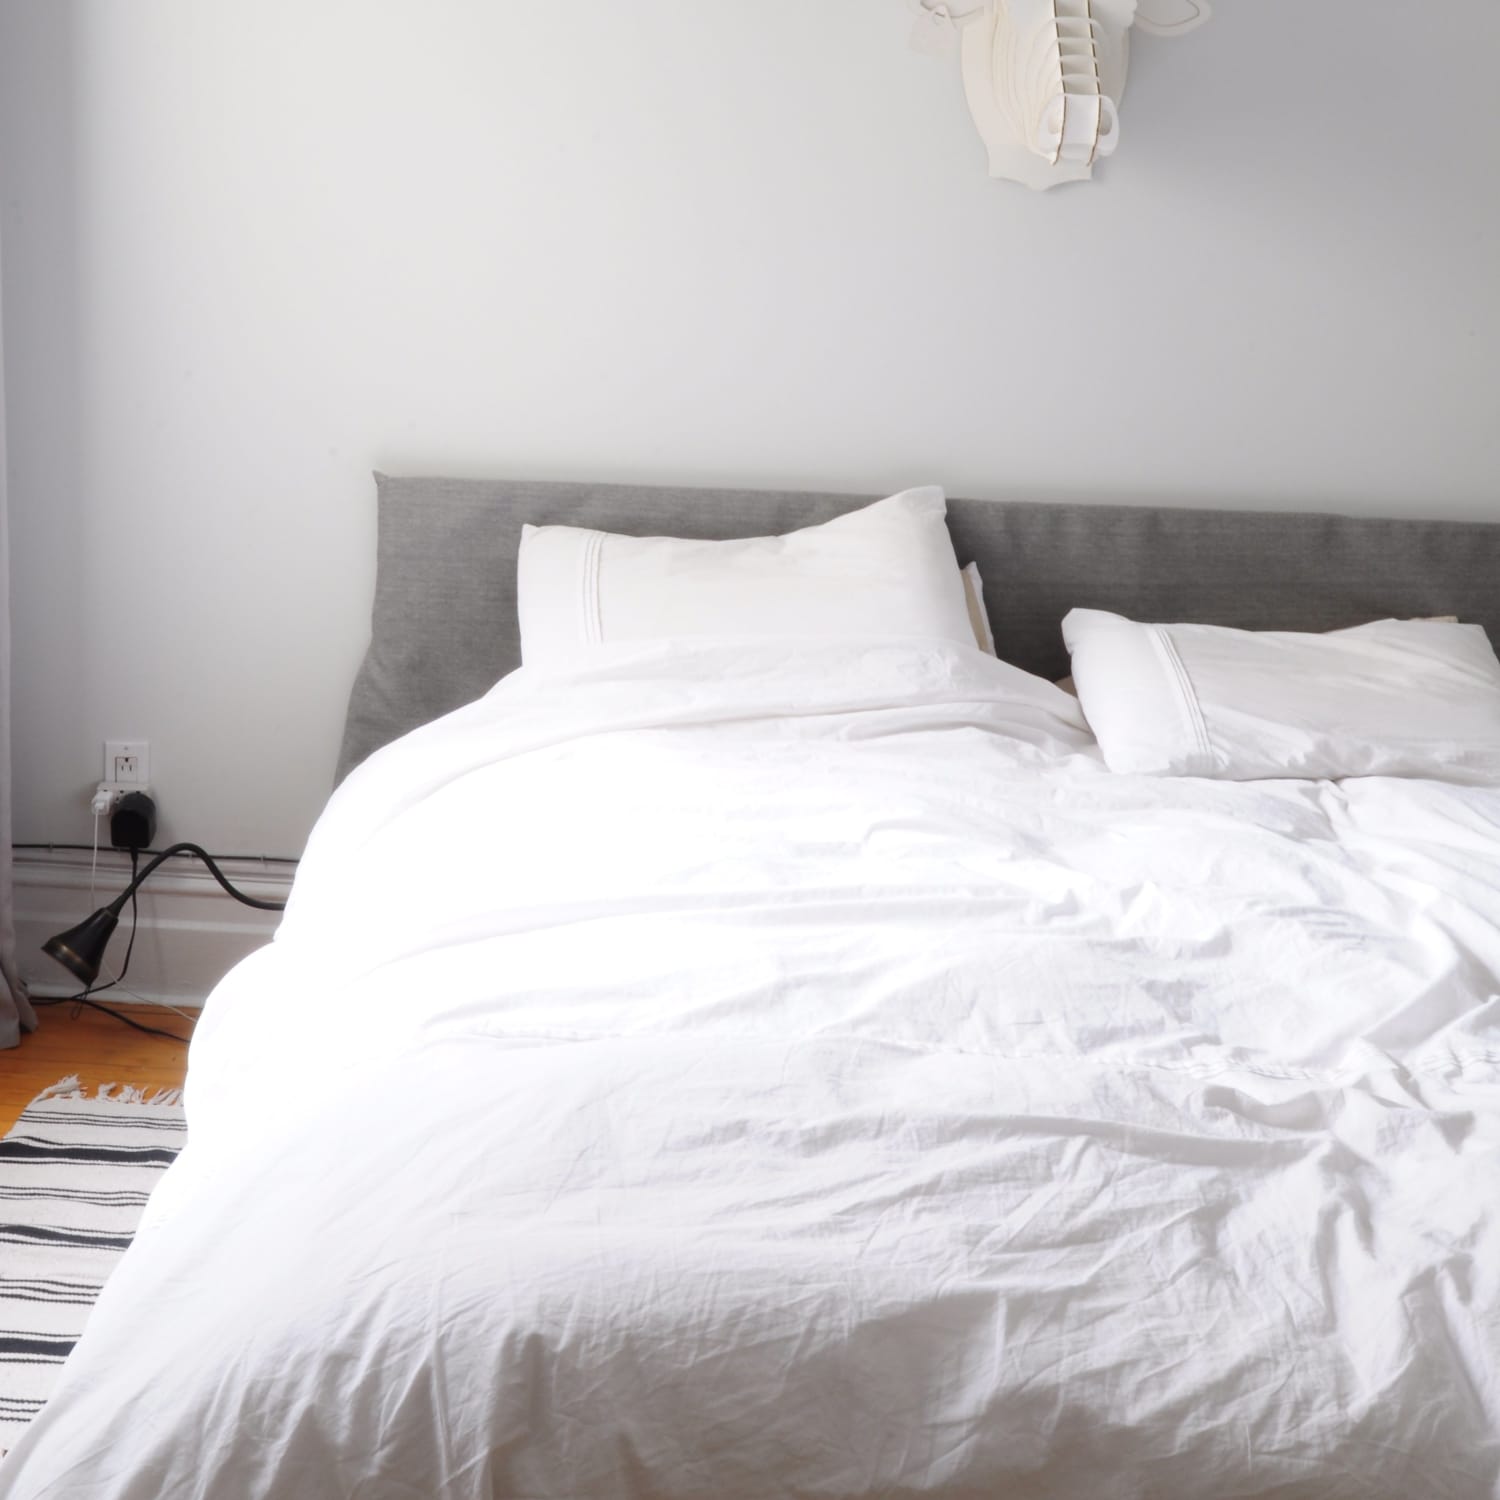 How To Clean Your Bedroom Thoroughly And Efficiently A